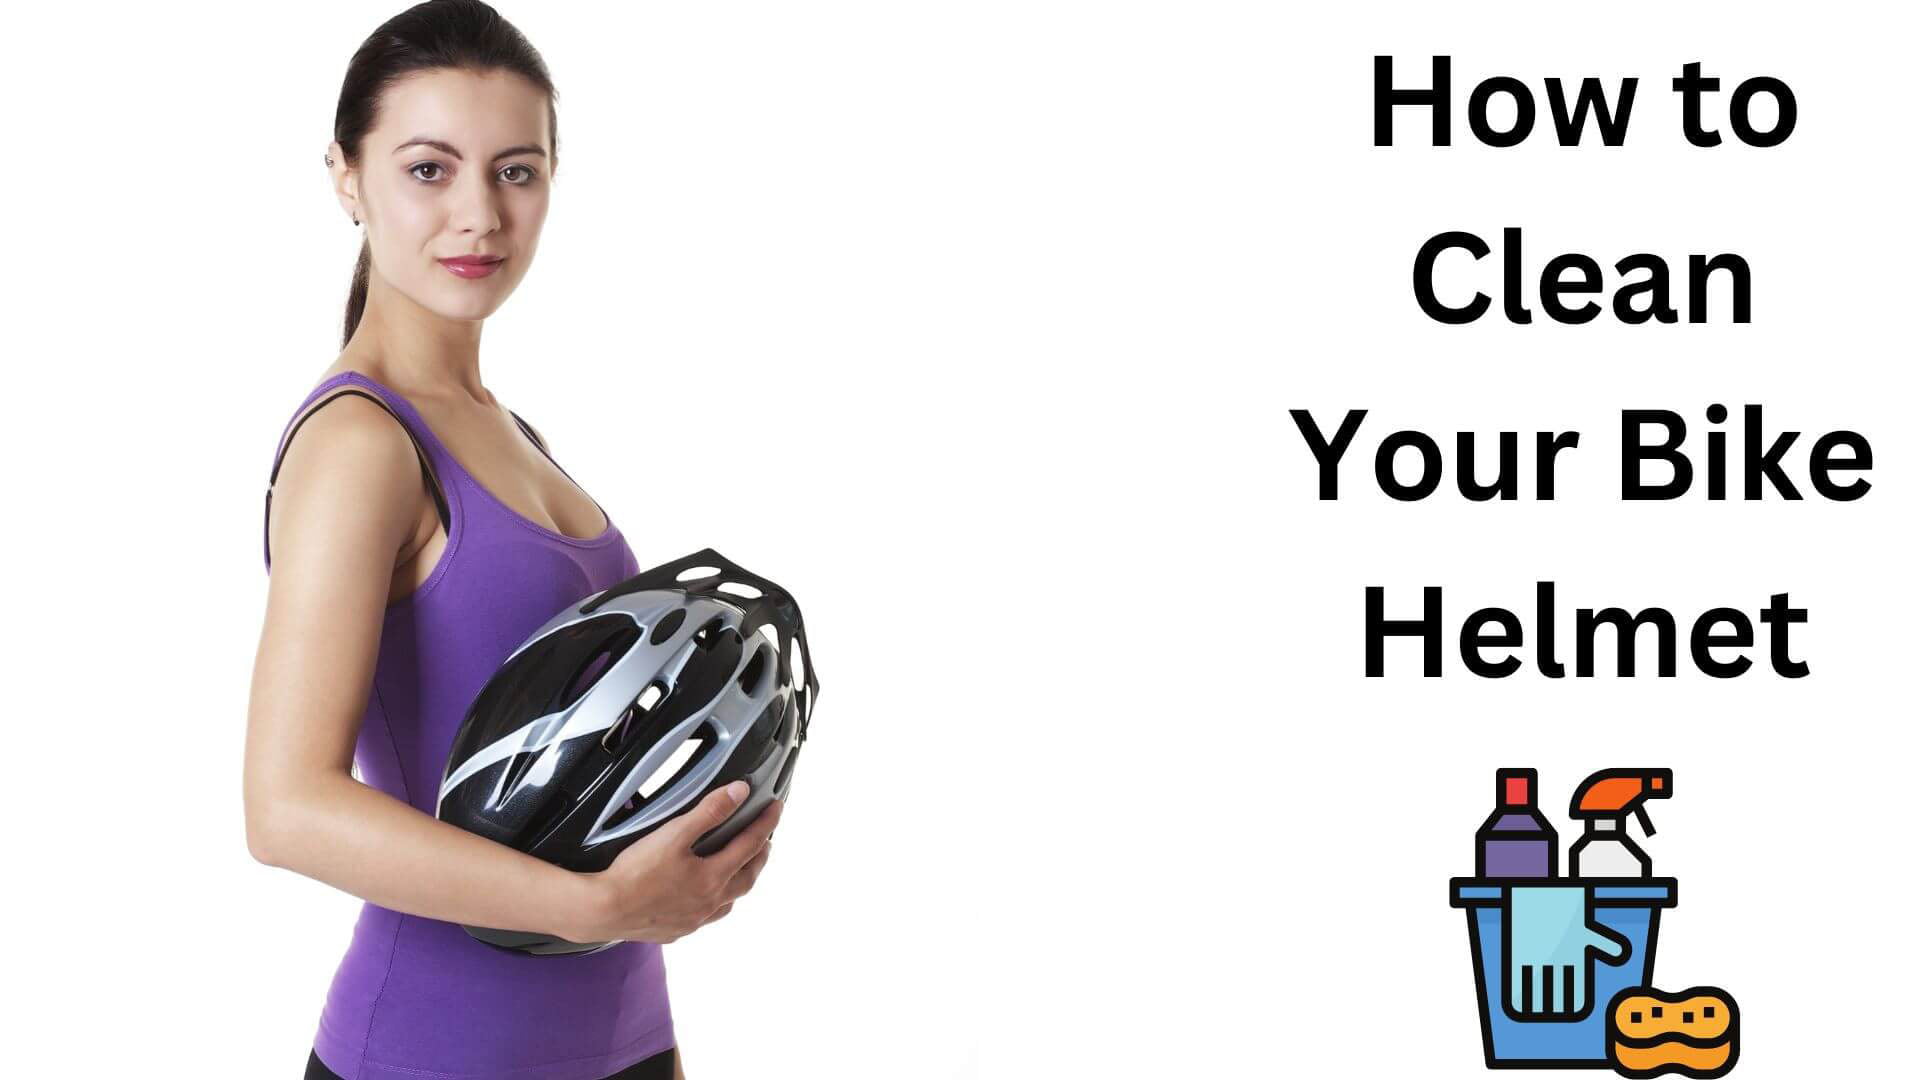 How to Clean Bike Helmet? Step By Step Instructions.